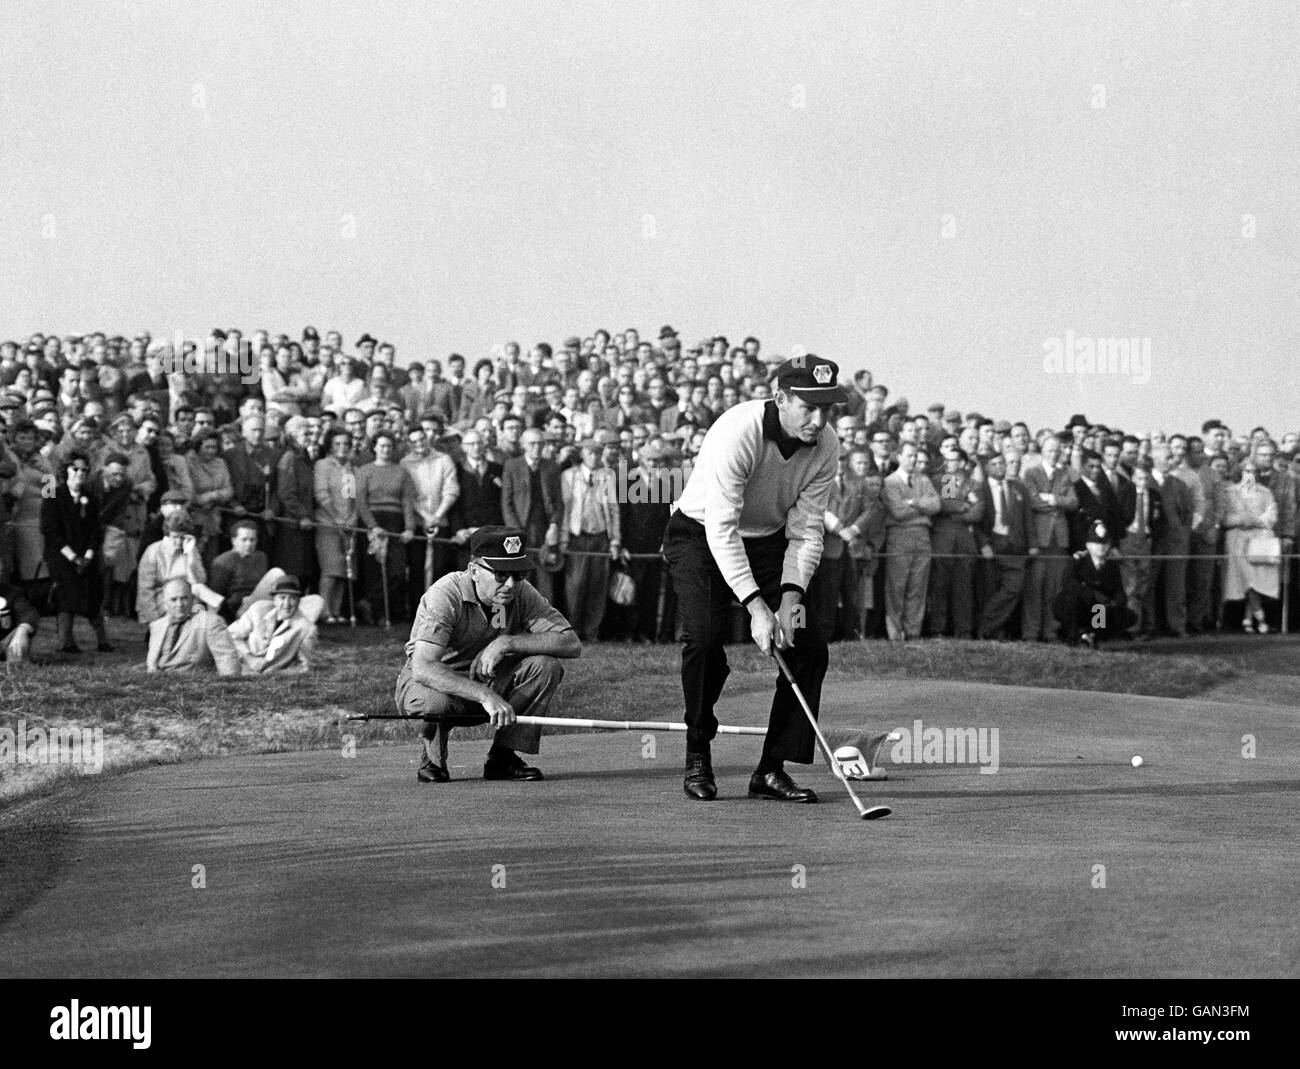 Golf - Ryder Cup - Great Britain and Ireland v USA - Royal Lytham and St Annes. Jerry Barber, left, the United States Captain, and his partner Dow Finsterwald, sizing a putt at the 13th green. Stock Photo